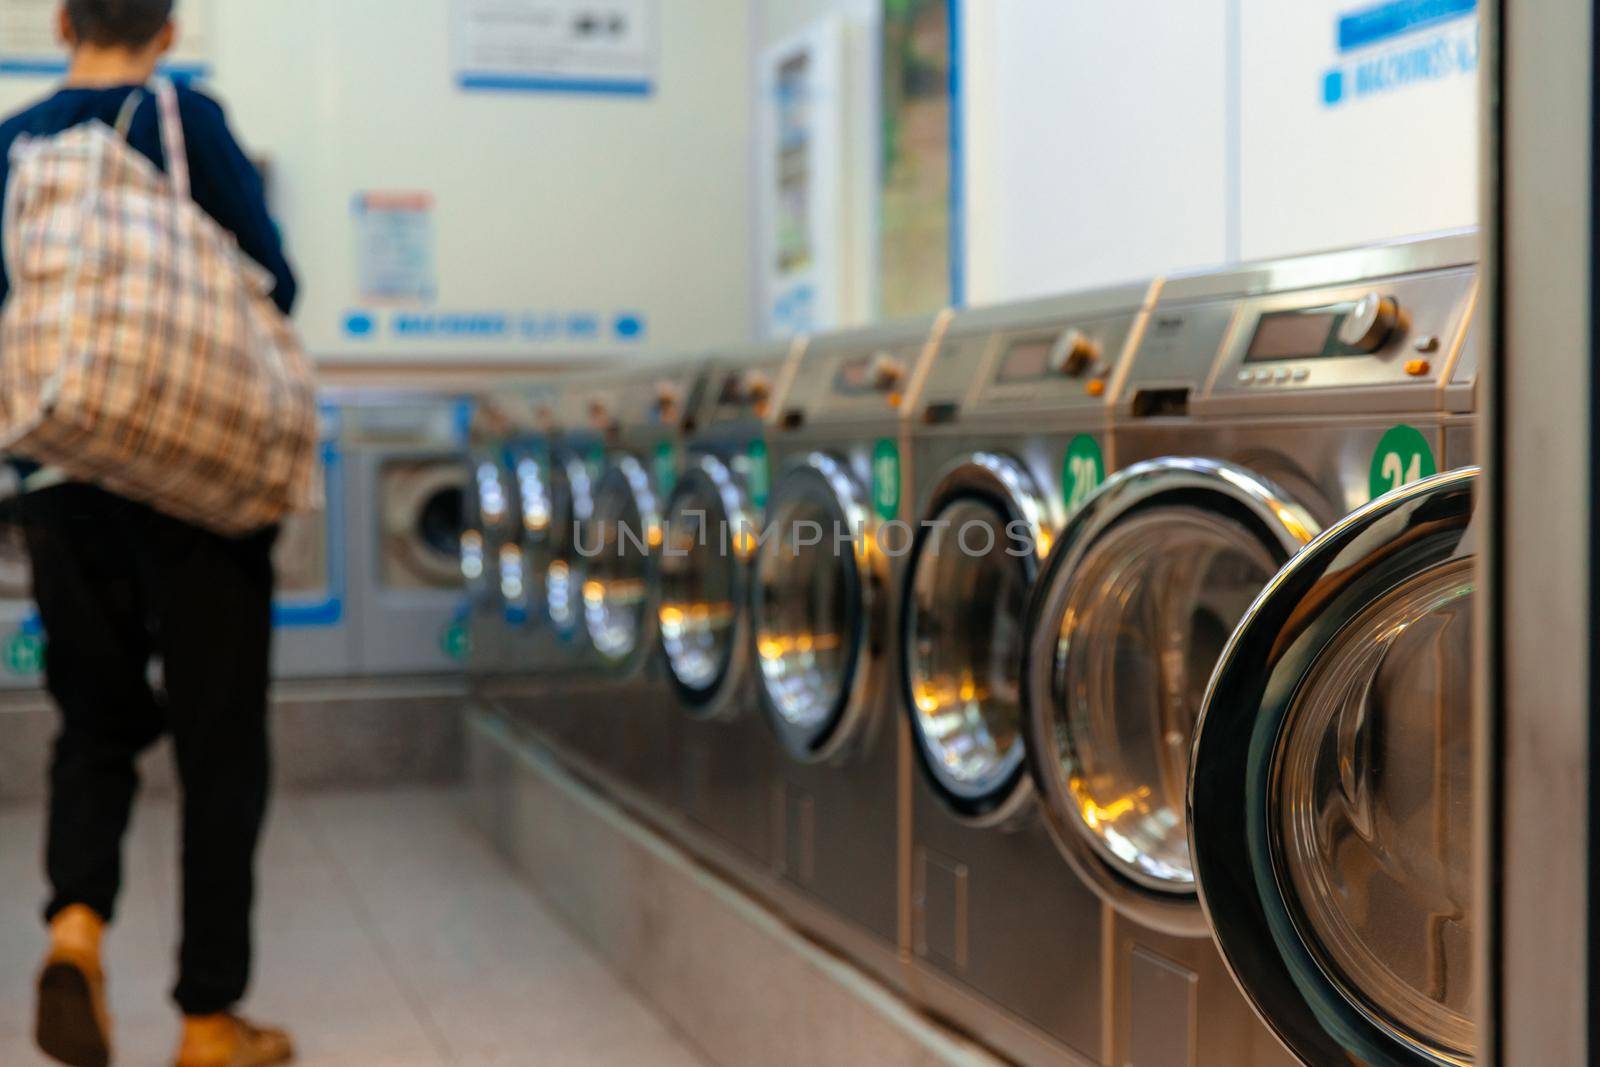 Iaundry machines in laundromat. by RecCameraStock